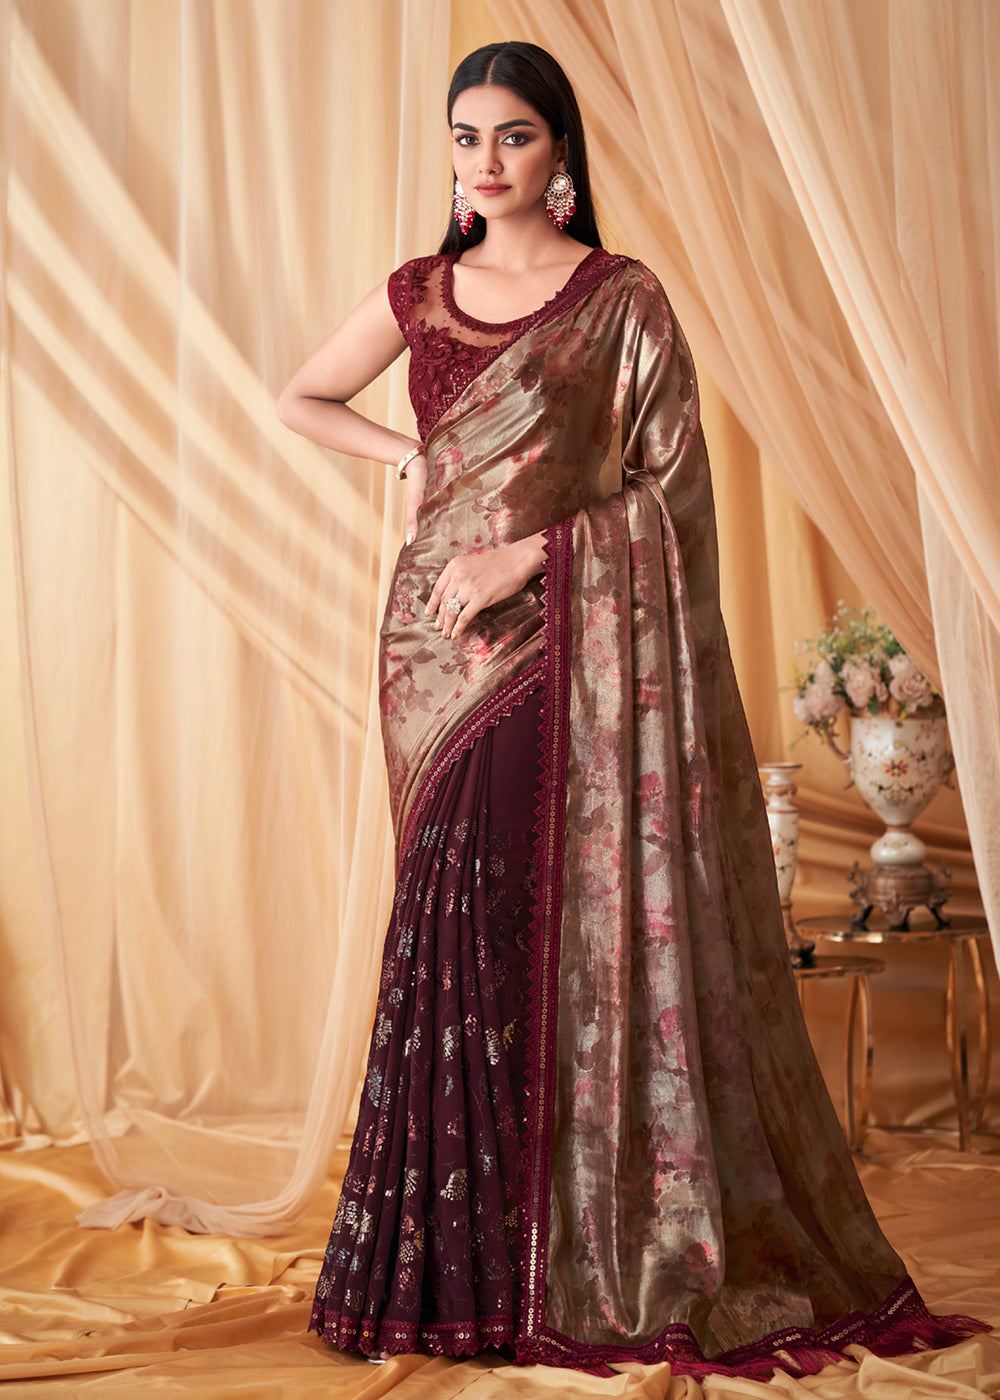 Buy Now Maroon Shimmer Georgette Silk Festive Party Saree Online in USA, UK, Canada & Worldwide at Empress Clothing. 